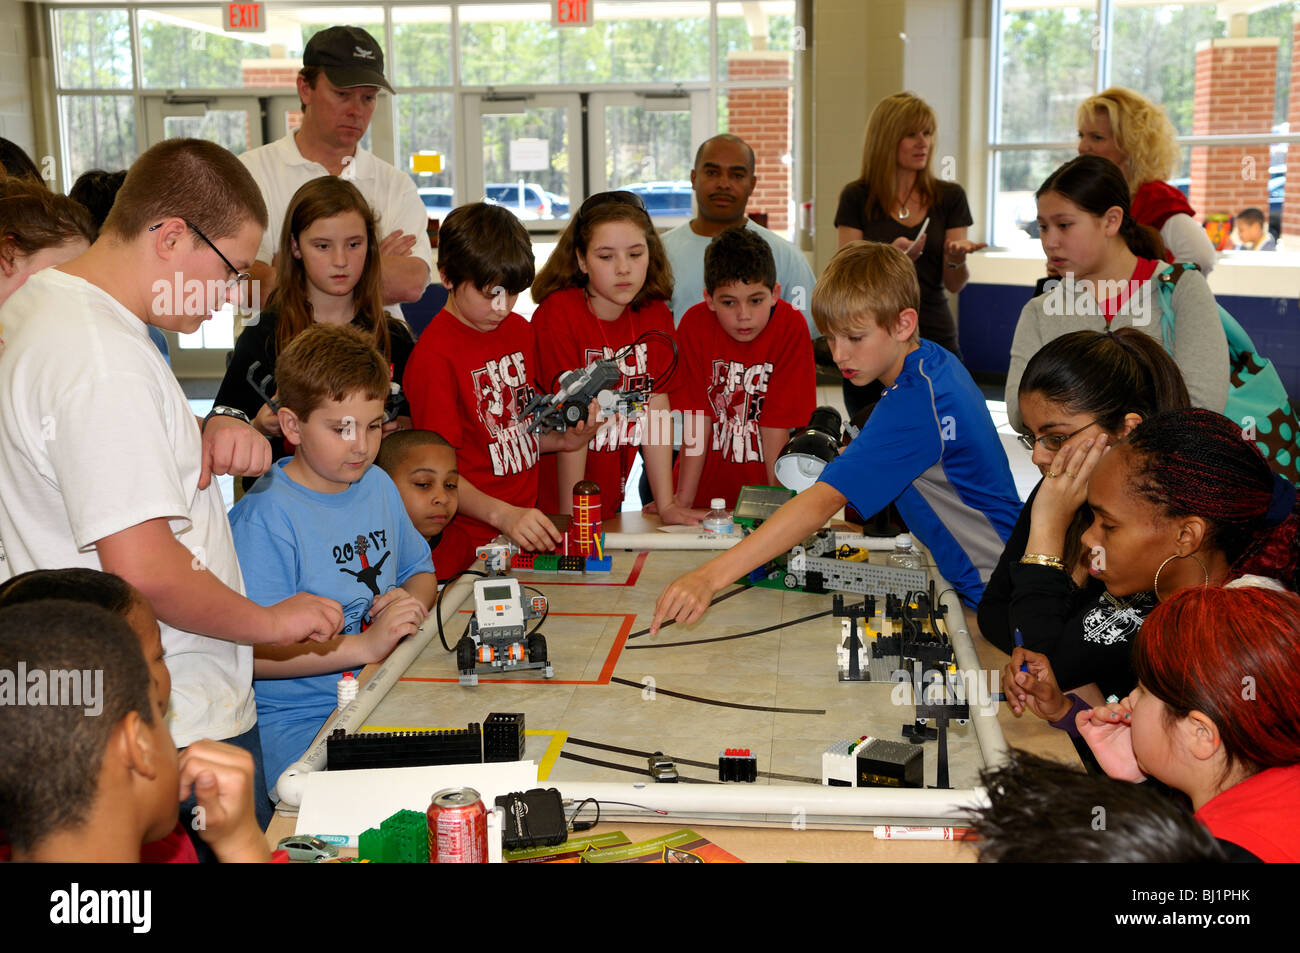 School kids building and testing a Lego robot at a science fair. USA. Stock Photo